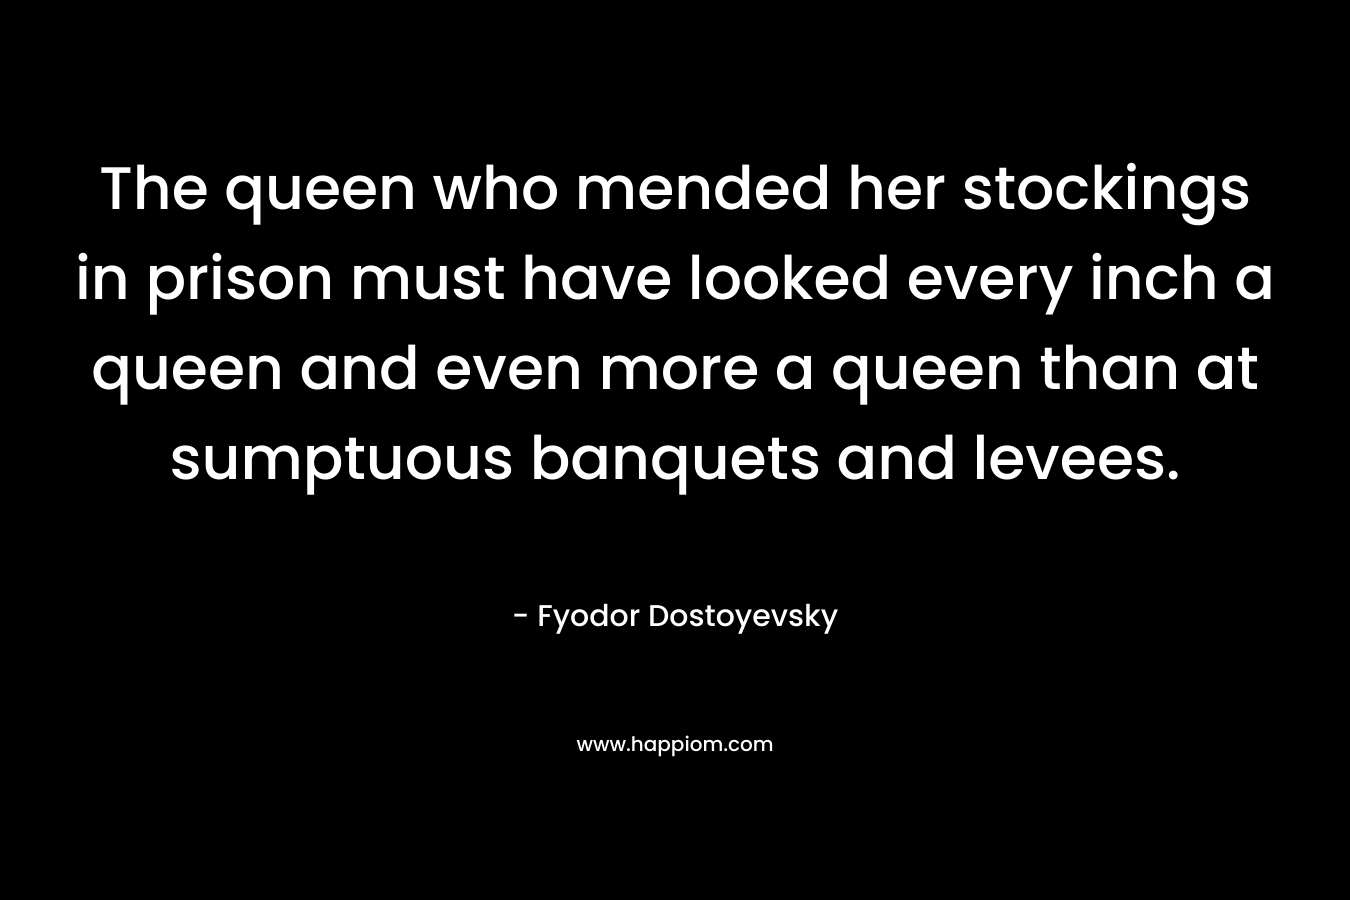 The queen who mended her stockings in prison must have looked every inch a queen and even more a queen than at sumptuous banquets and levees. – Fyodor Dostoyevsky